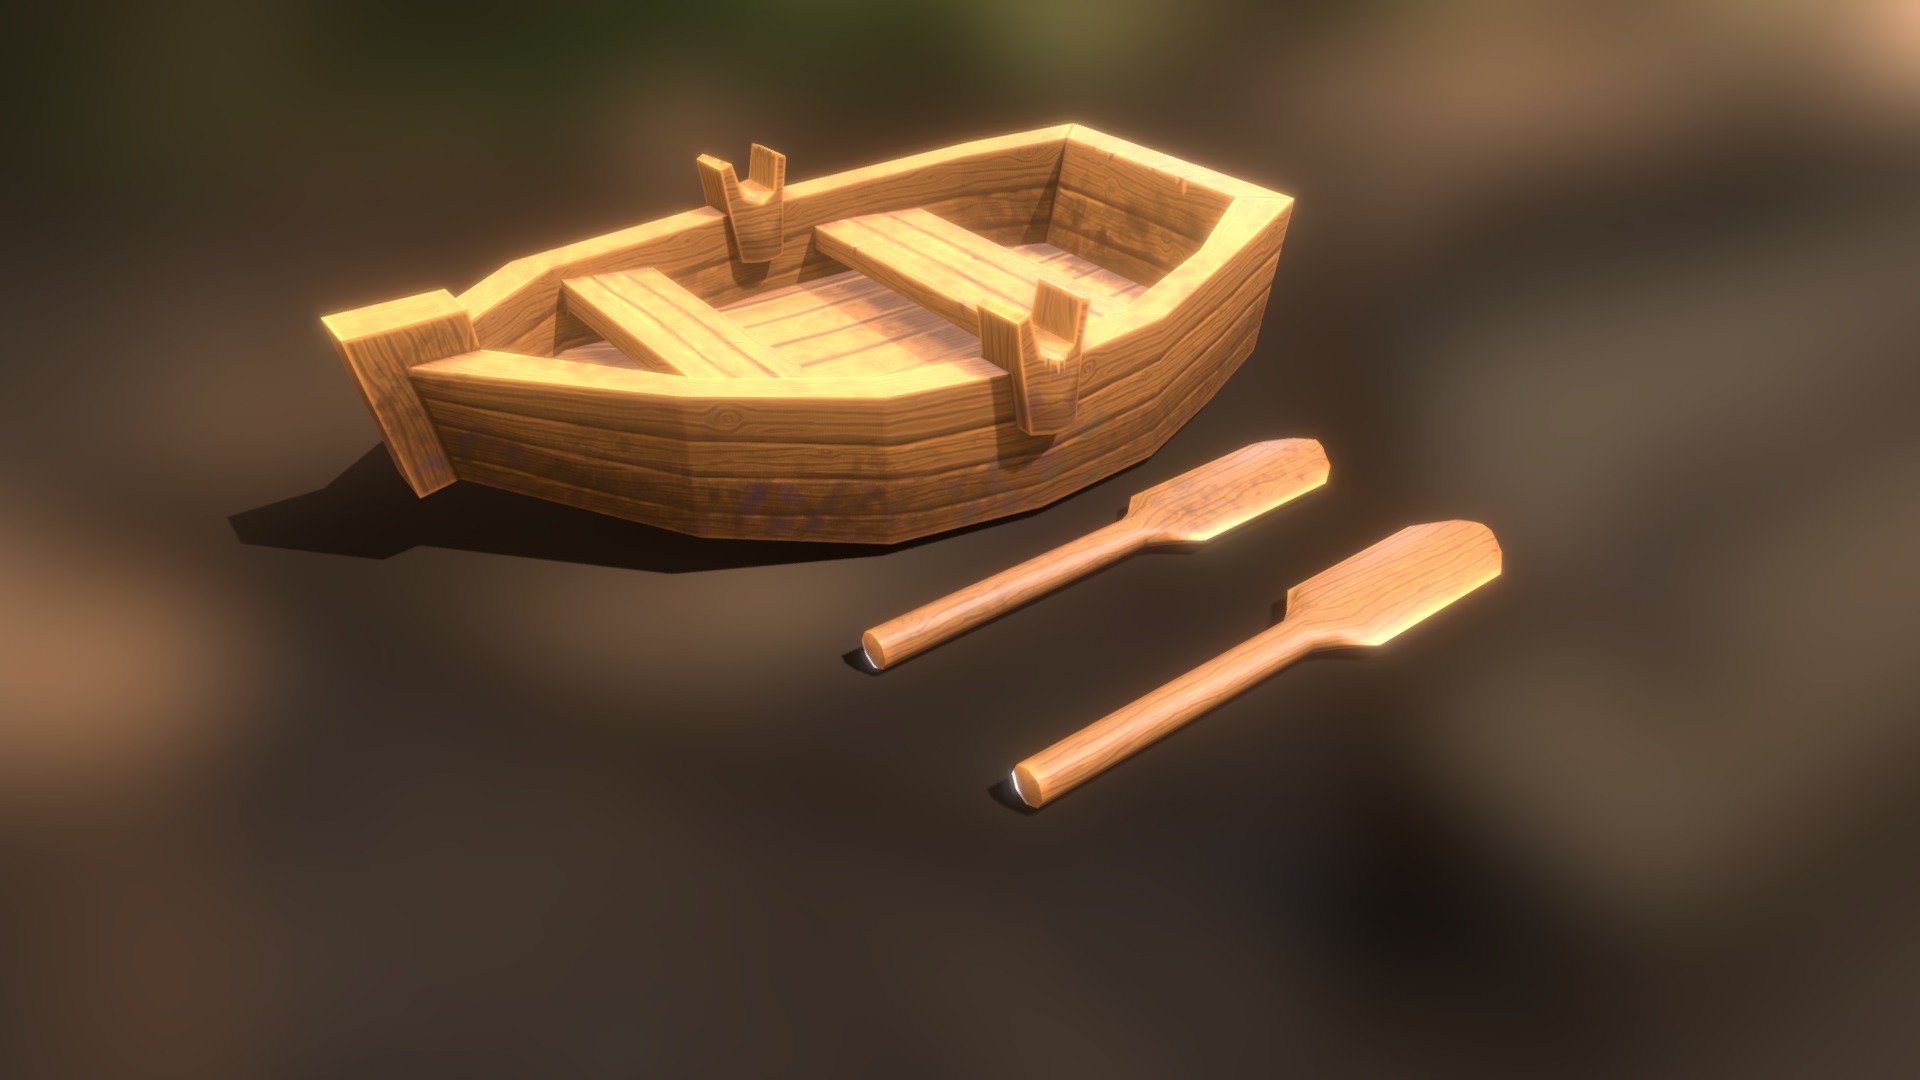 Beautiful stylized handpainted game prop Pirate rowing boat.

Additional file: Clean texture for a model with new wood for the boat 3d model